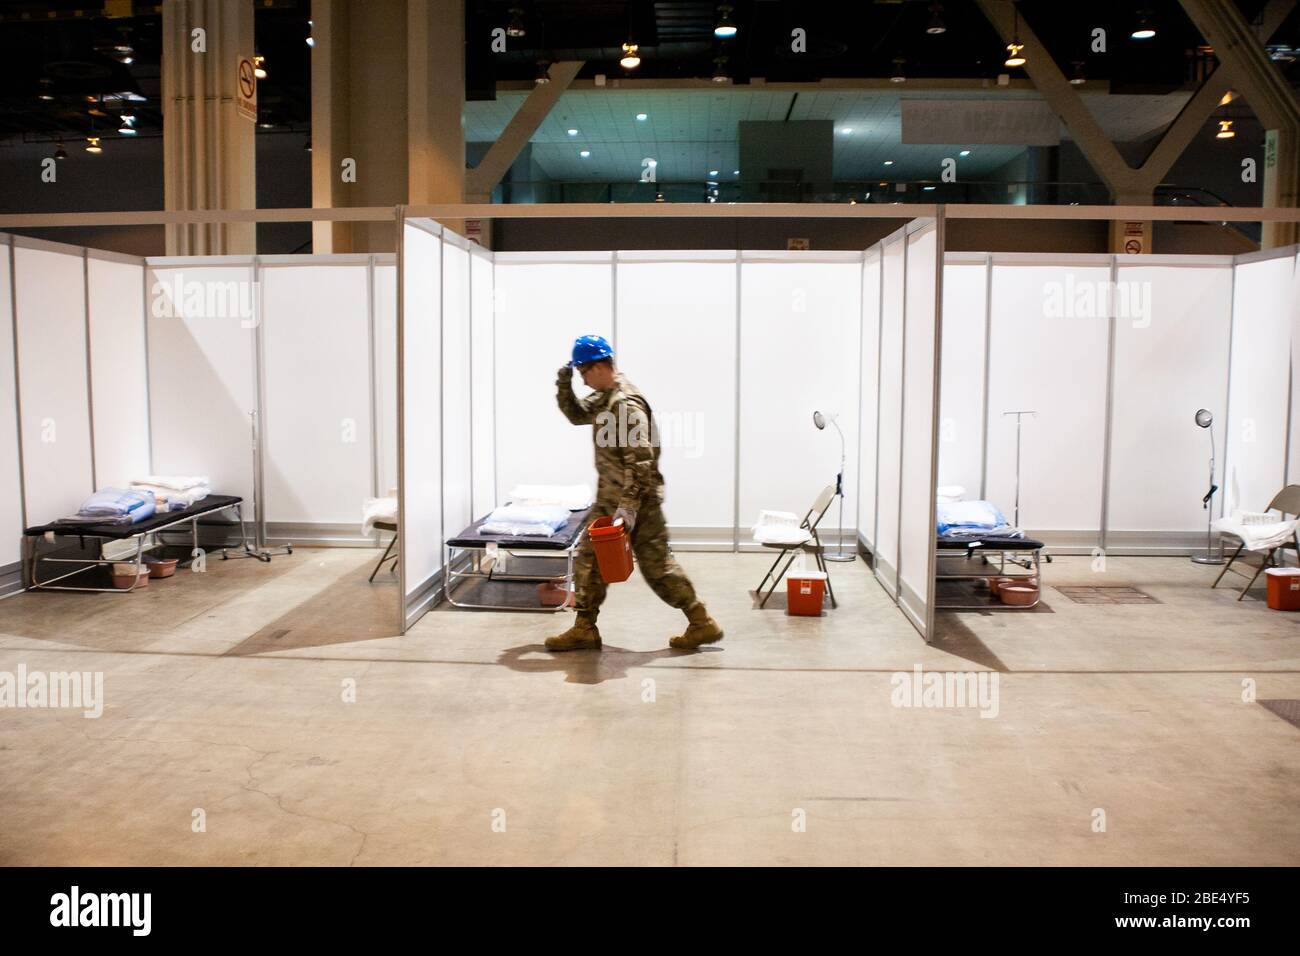 CHICAGO, USA - 31 March 2020 - Members of the Illinois Air National Guard assemble medical equipment at the McCormick Place Convention Center in respo Stock Photo